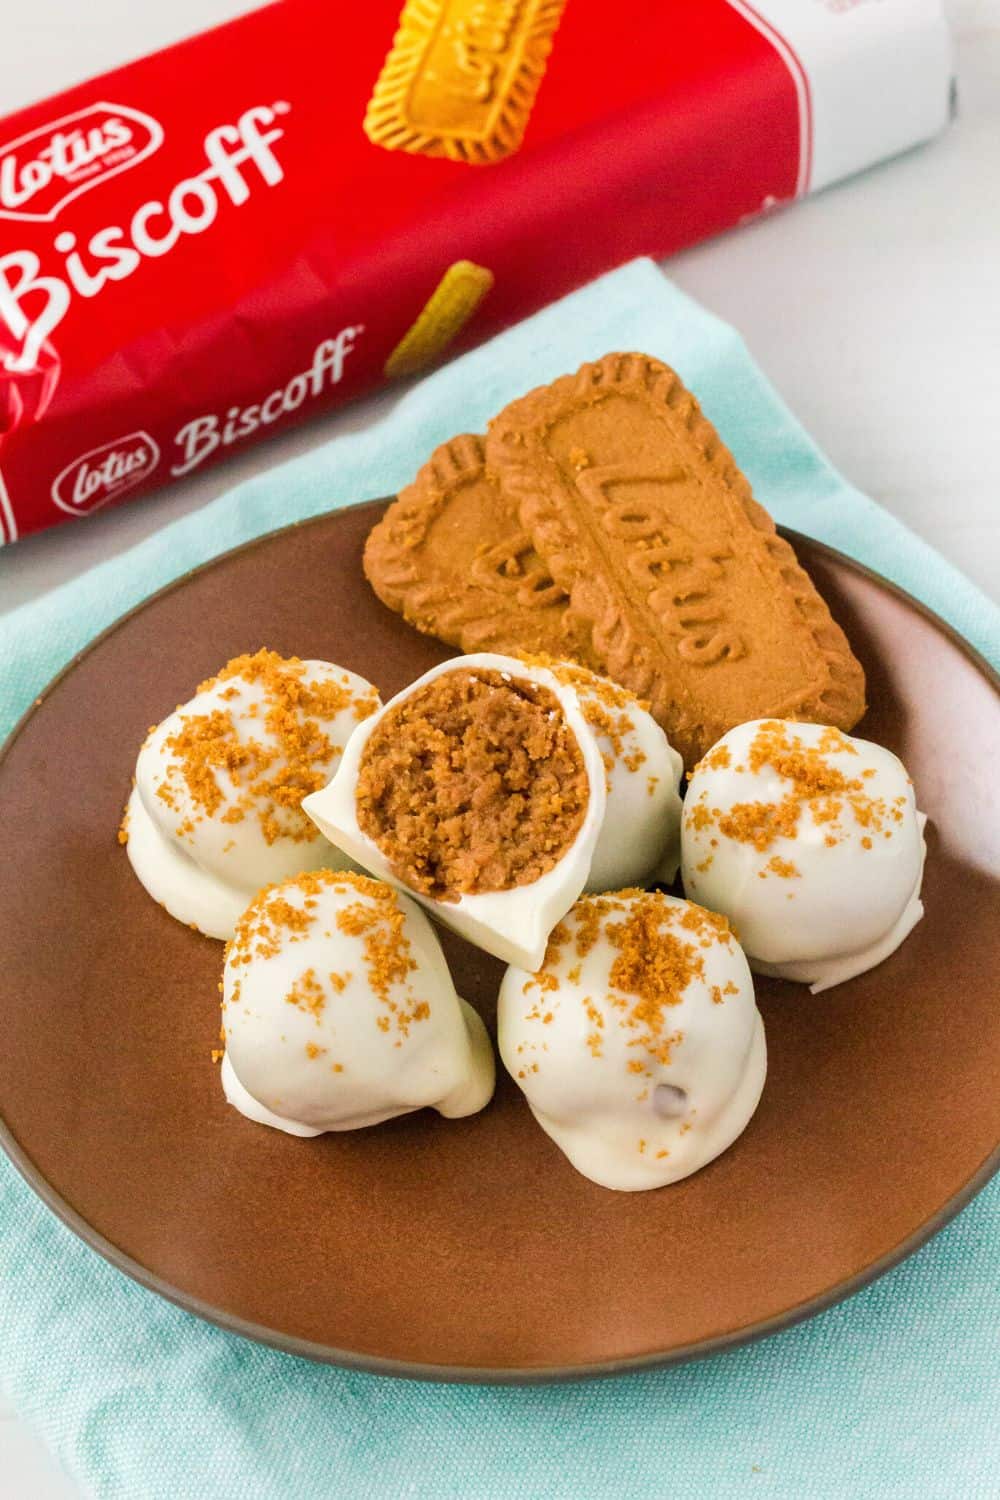 no-bake Biscoff truffles on a brown plate, with one truffle cut in half to show the interior. Two lotus cookies are on the plate, with the package of Biscoff cookies in the background.